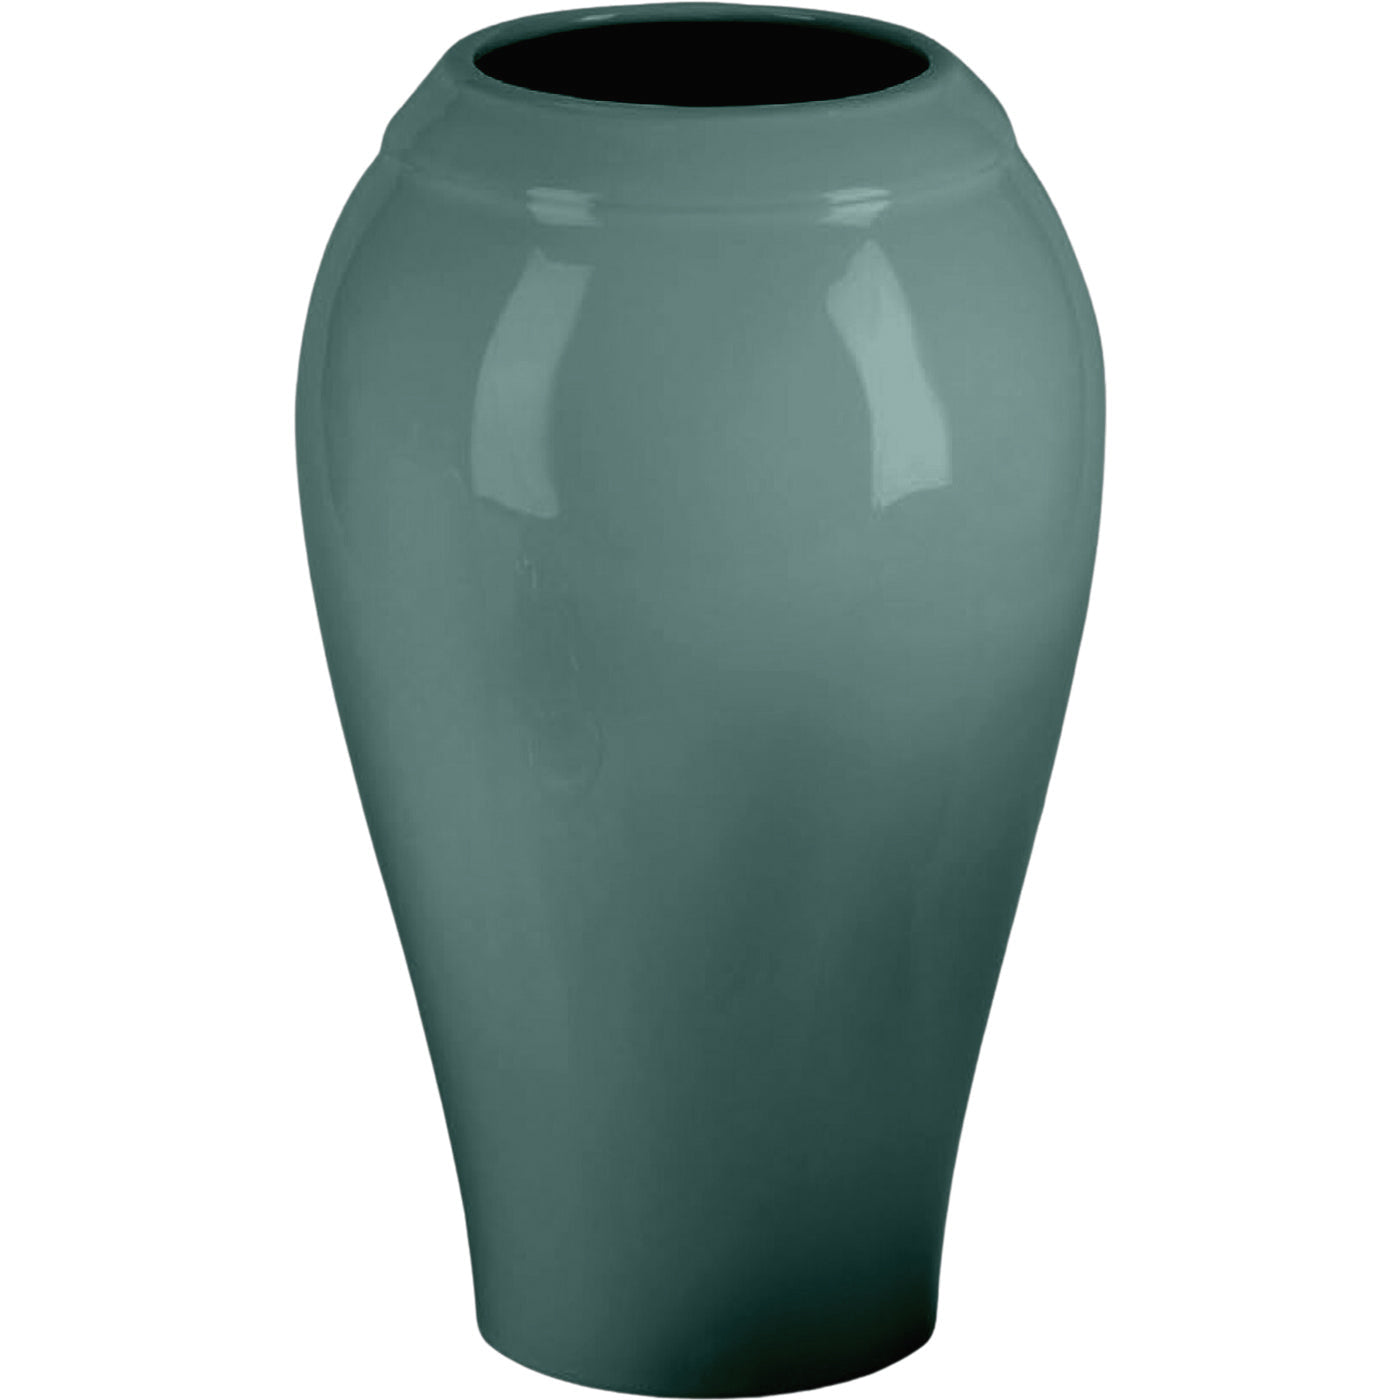 Grave vase Liscia green 21x13cm - 8.3x5.1in In green porcelain, wall attached LI144P/V